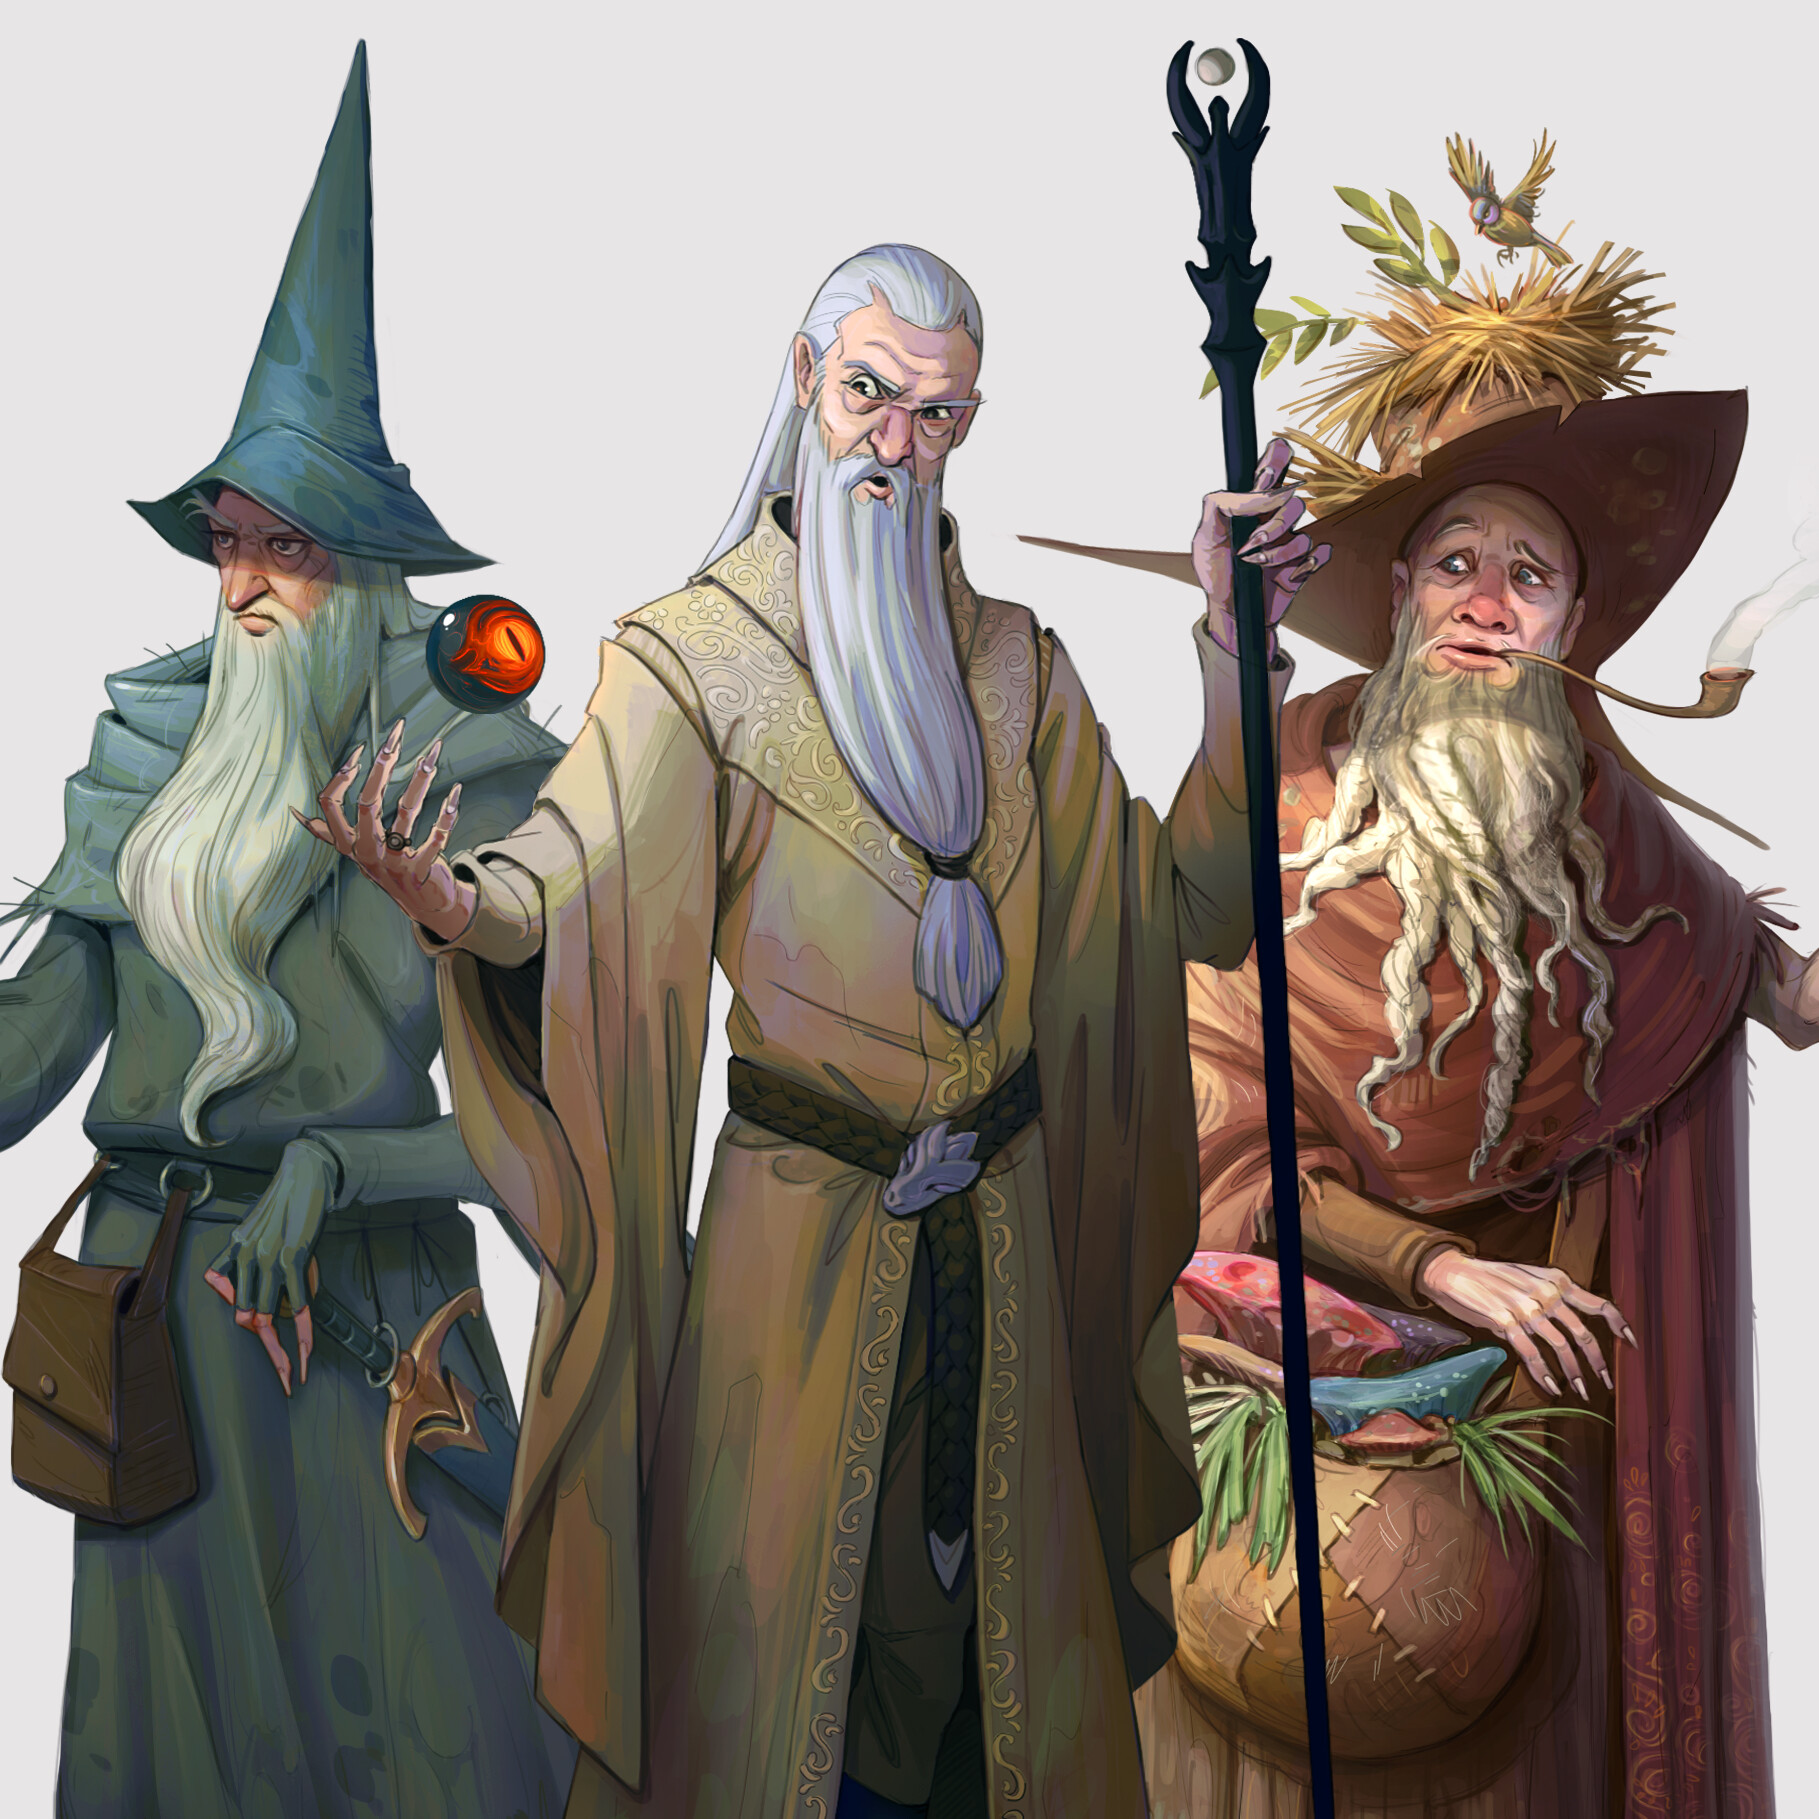 Wizards Presents: D&D and Magic: The Gathering News! - PHD Games